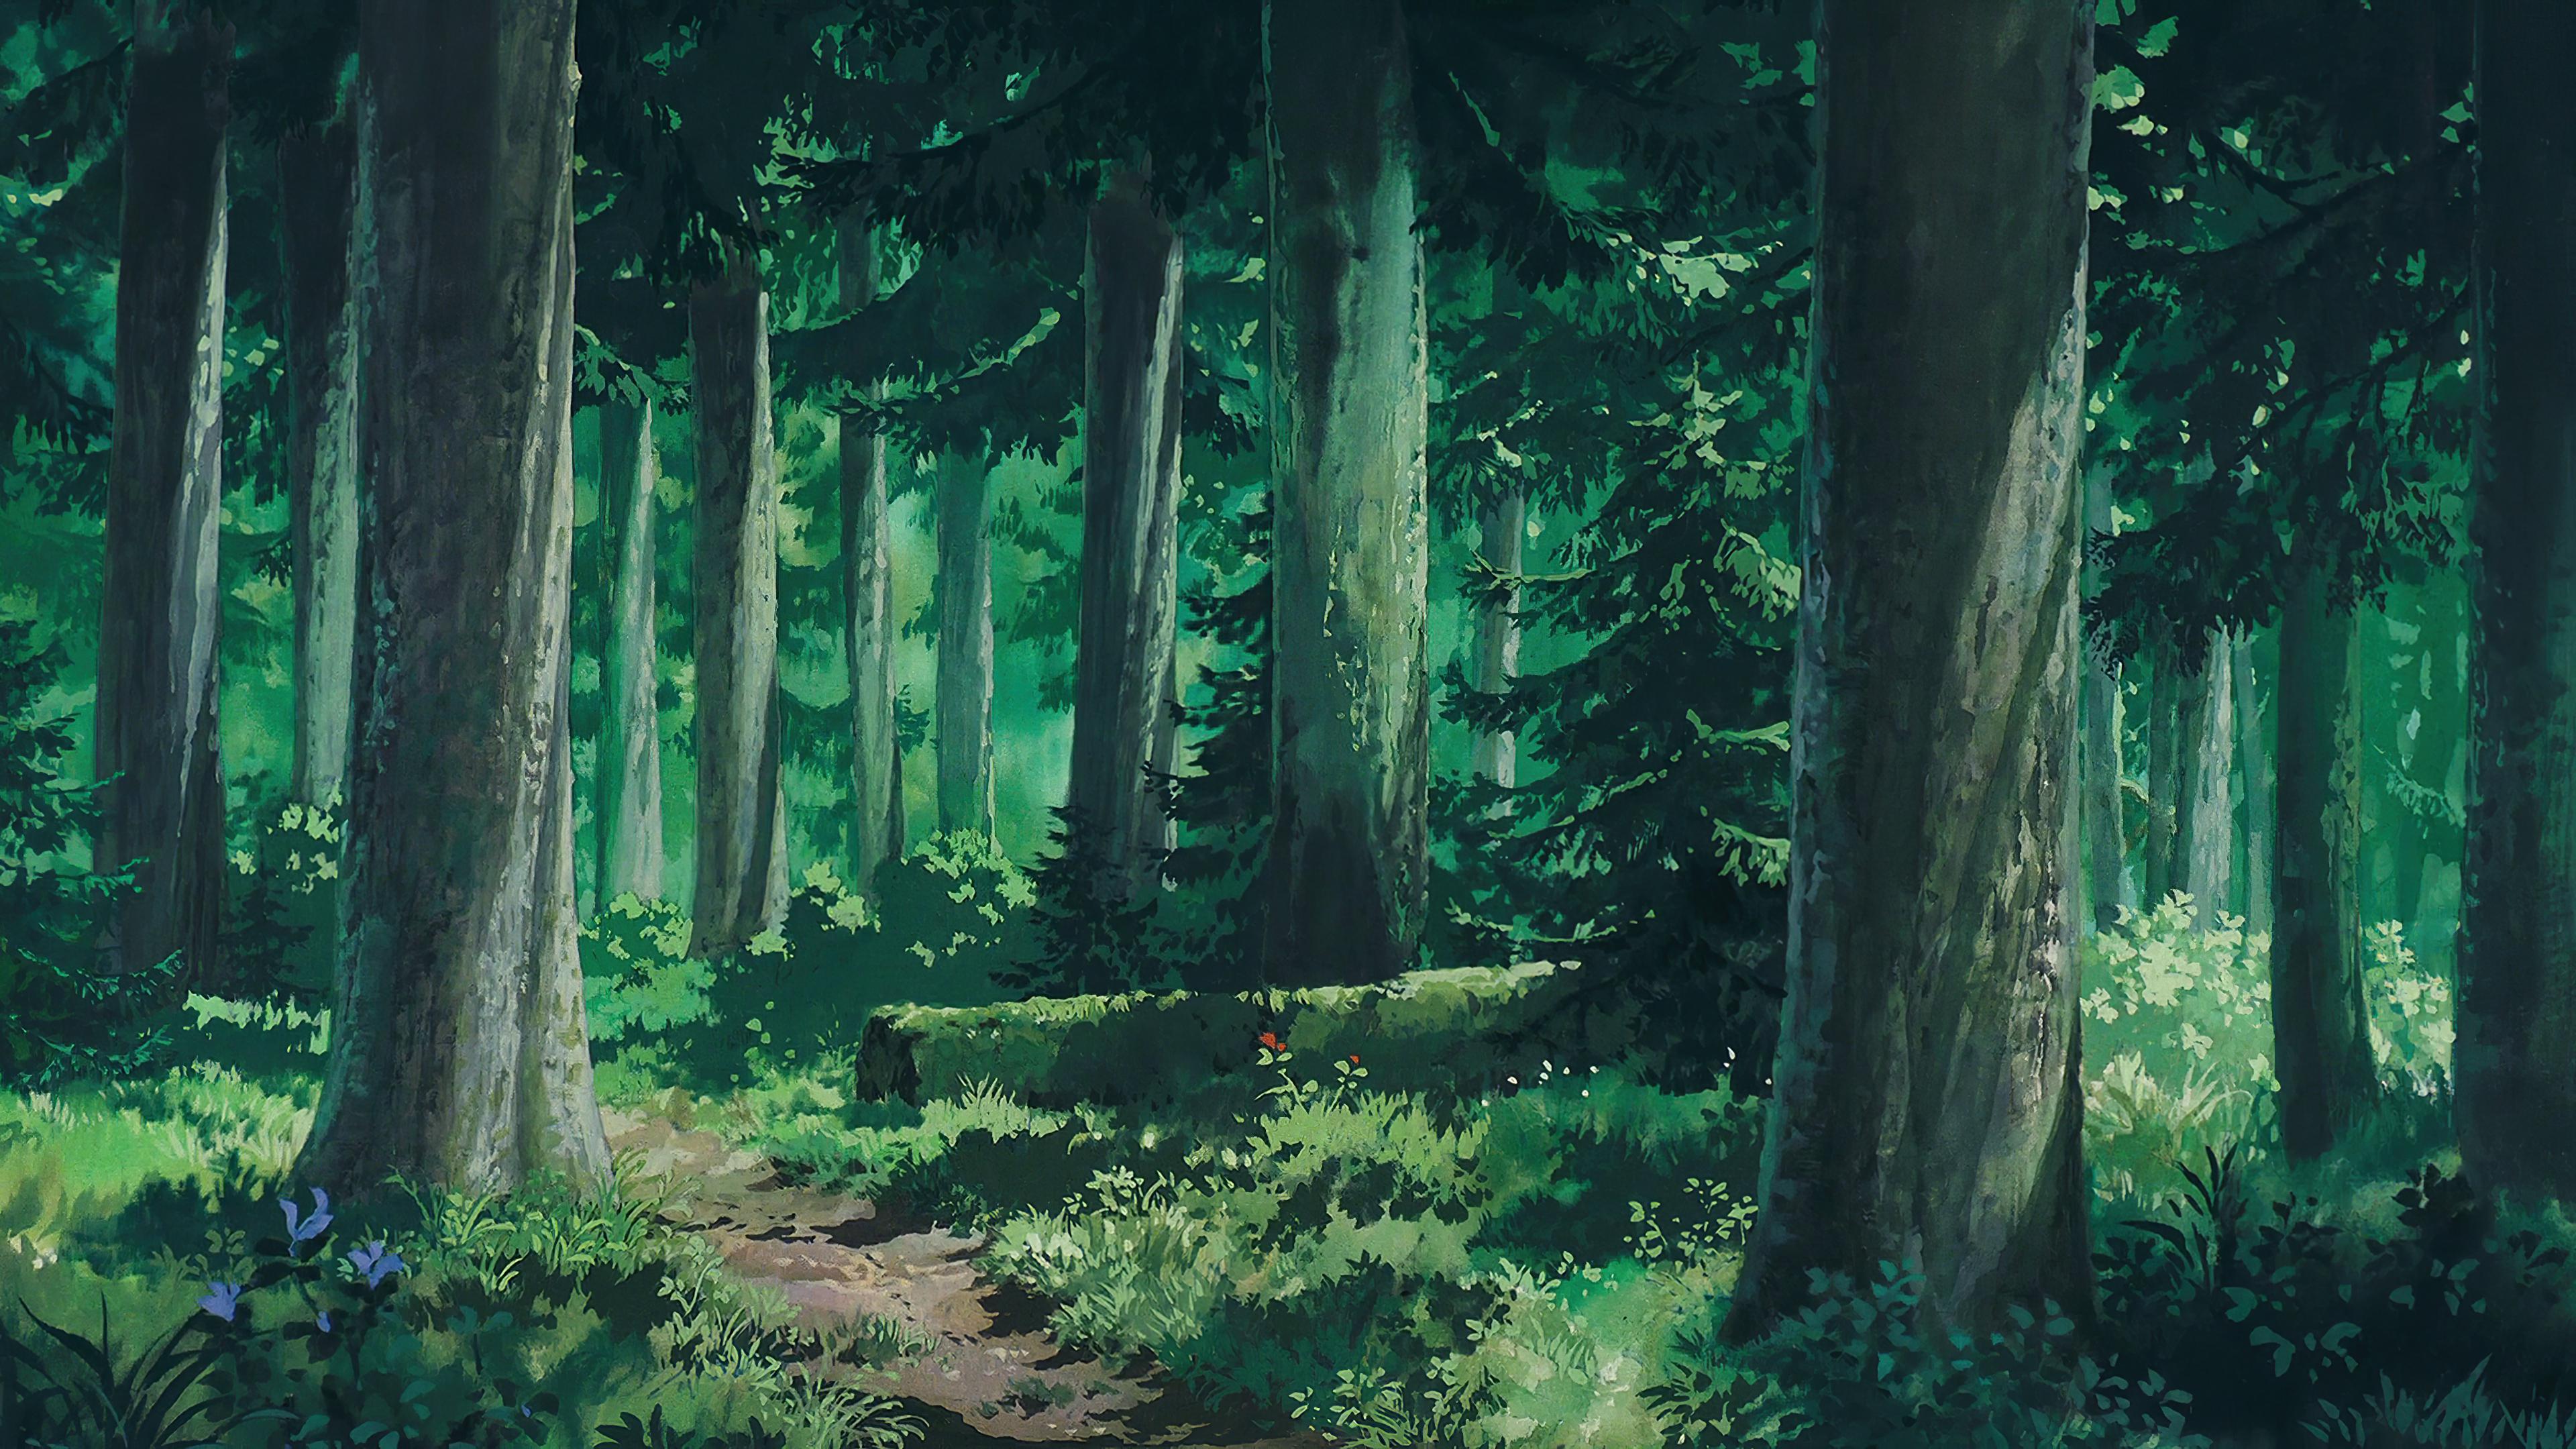 Forest 4K wallpapers for your desktop or mobile screen free and easy to